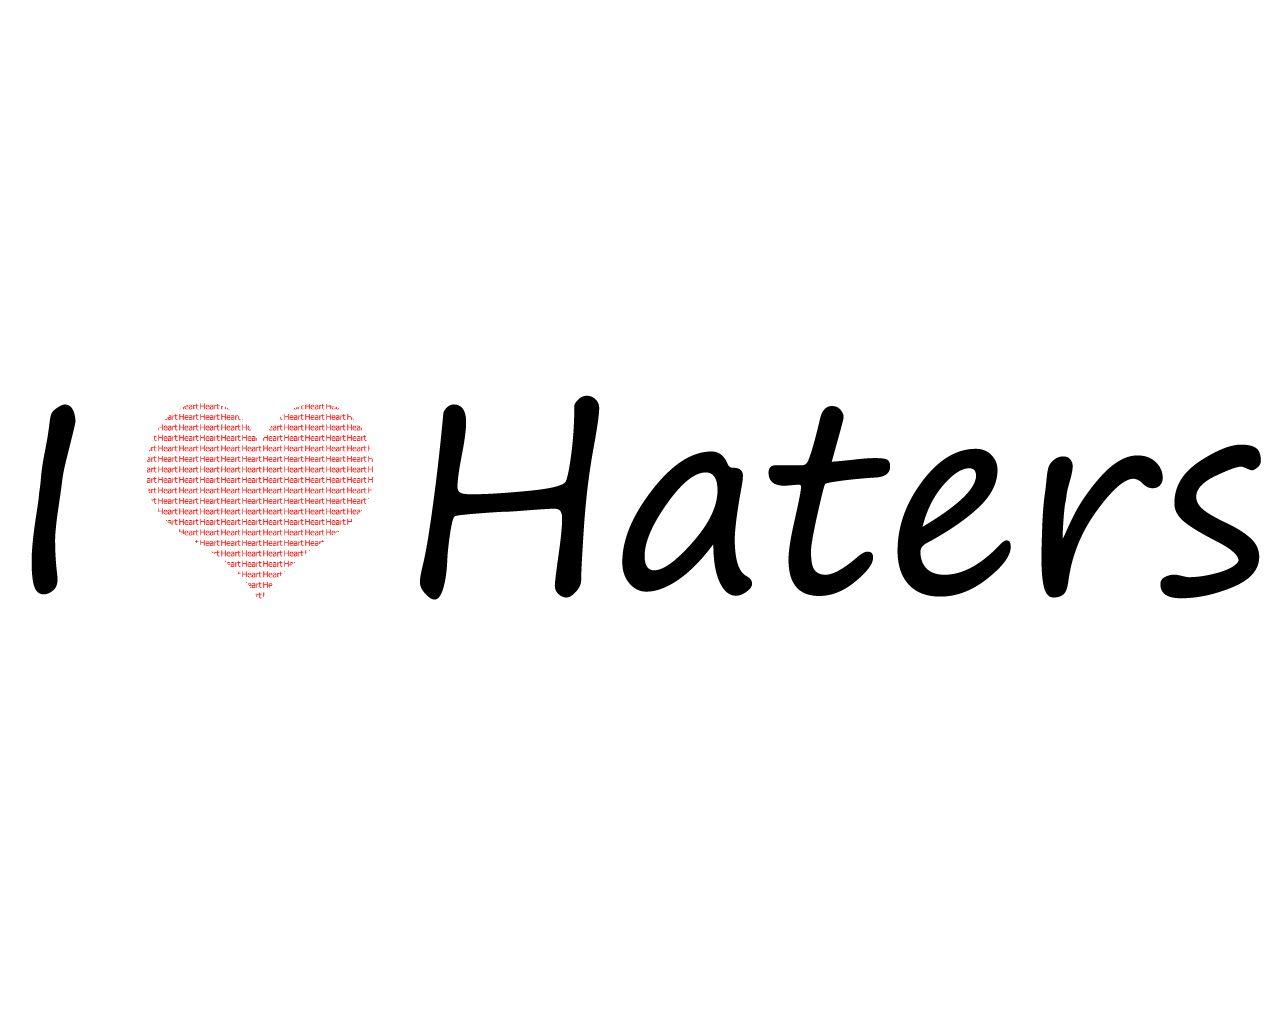 We Love The Haters image haters.duhh HD wallpaper and background